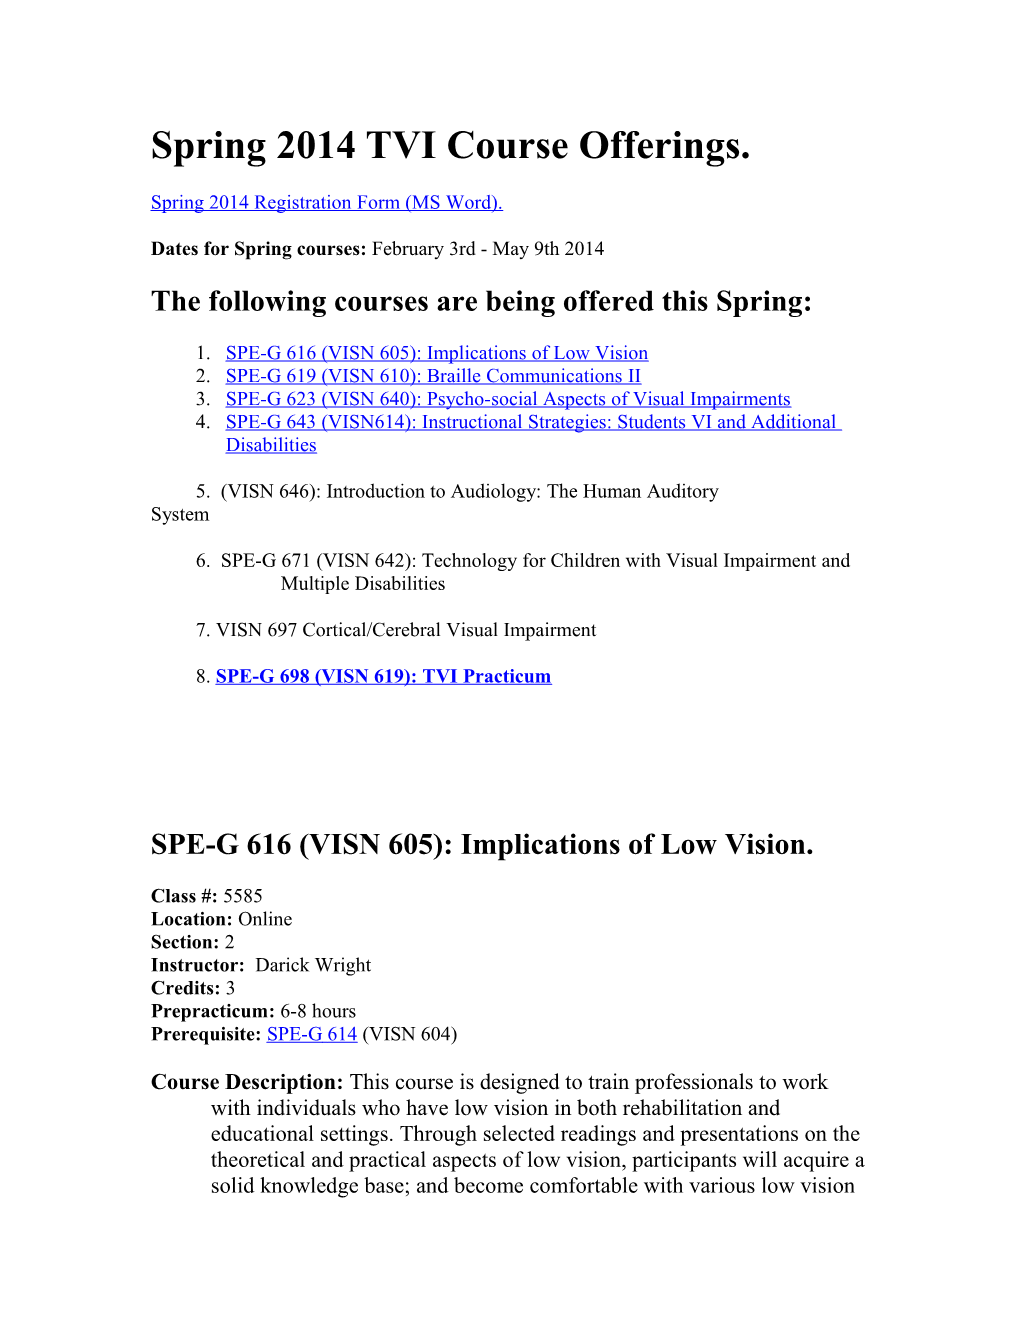 Spring 2010 TVI Course Offerings